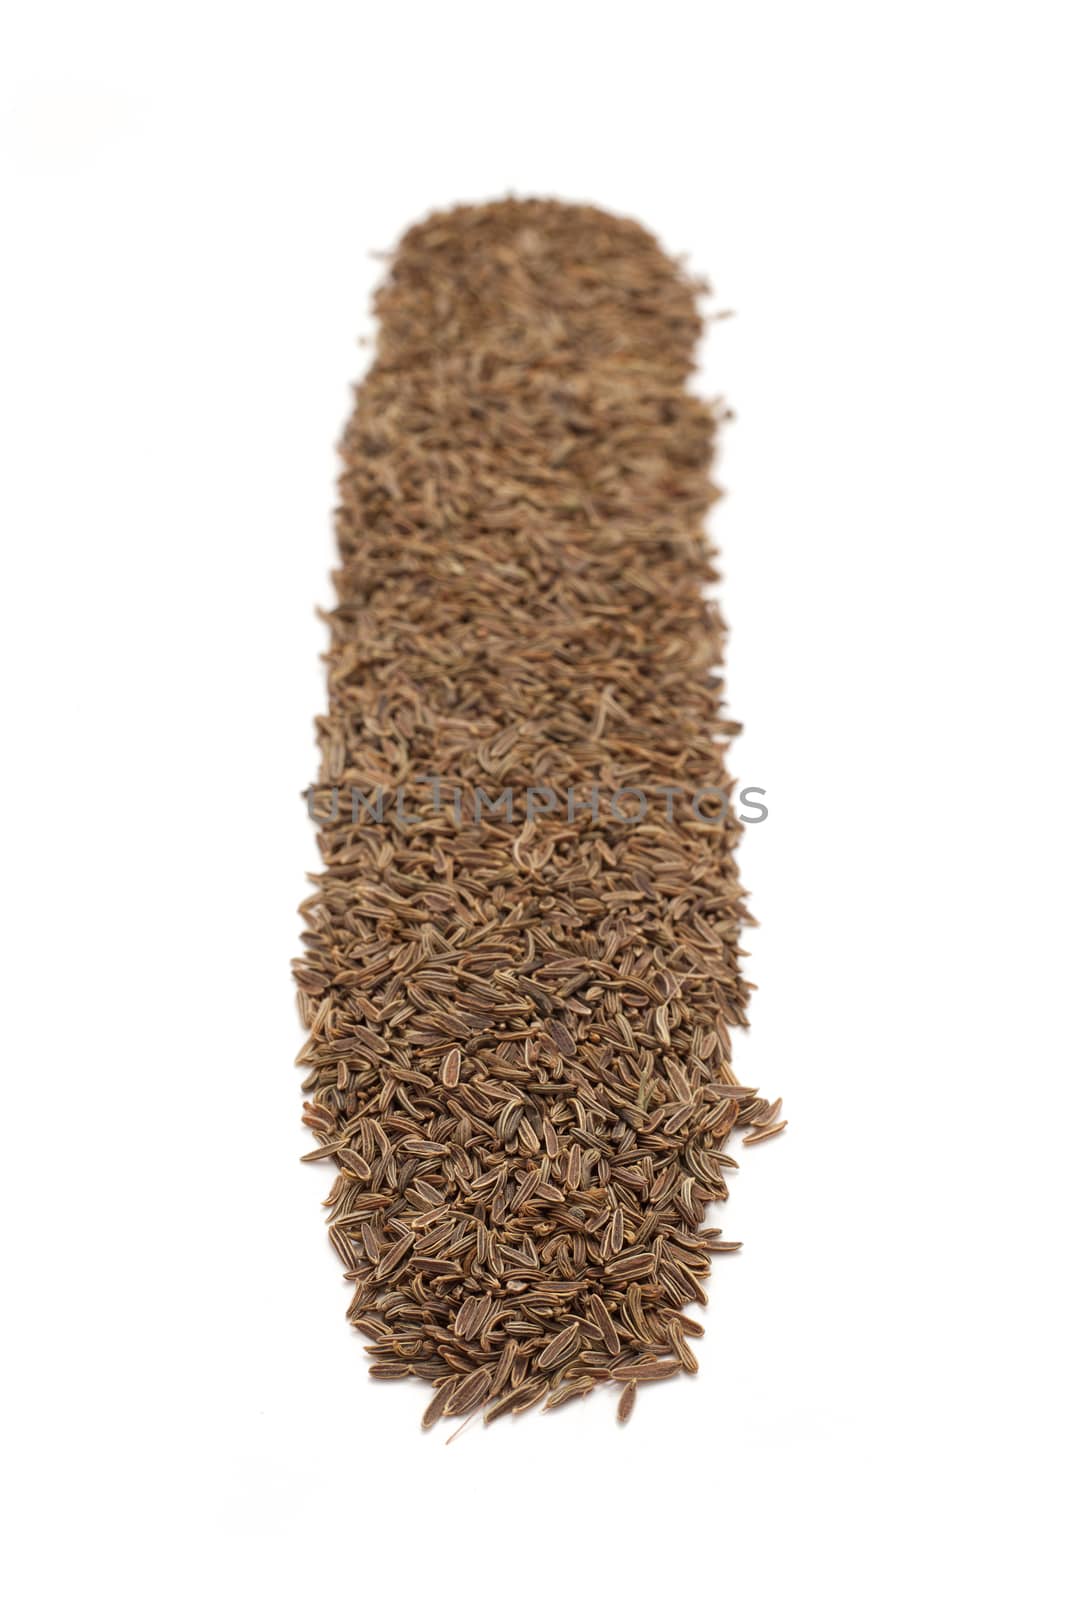 Row of Organic Caraway (Carum carvi) isolated on white background.